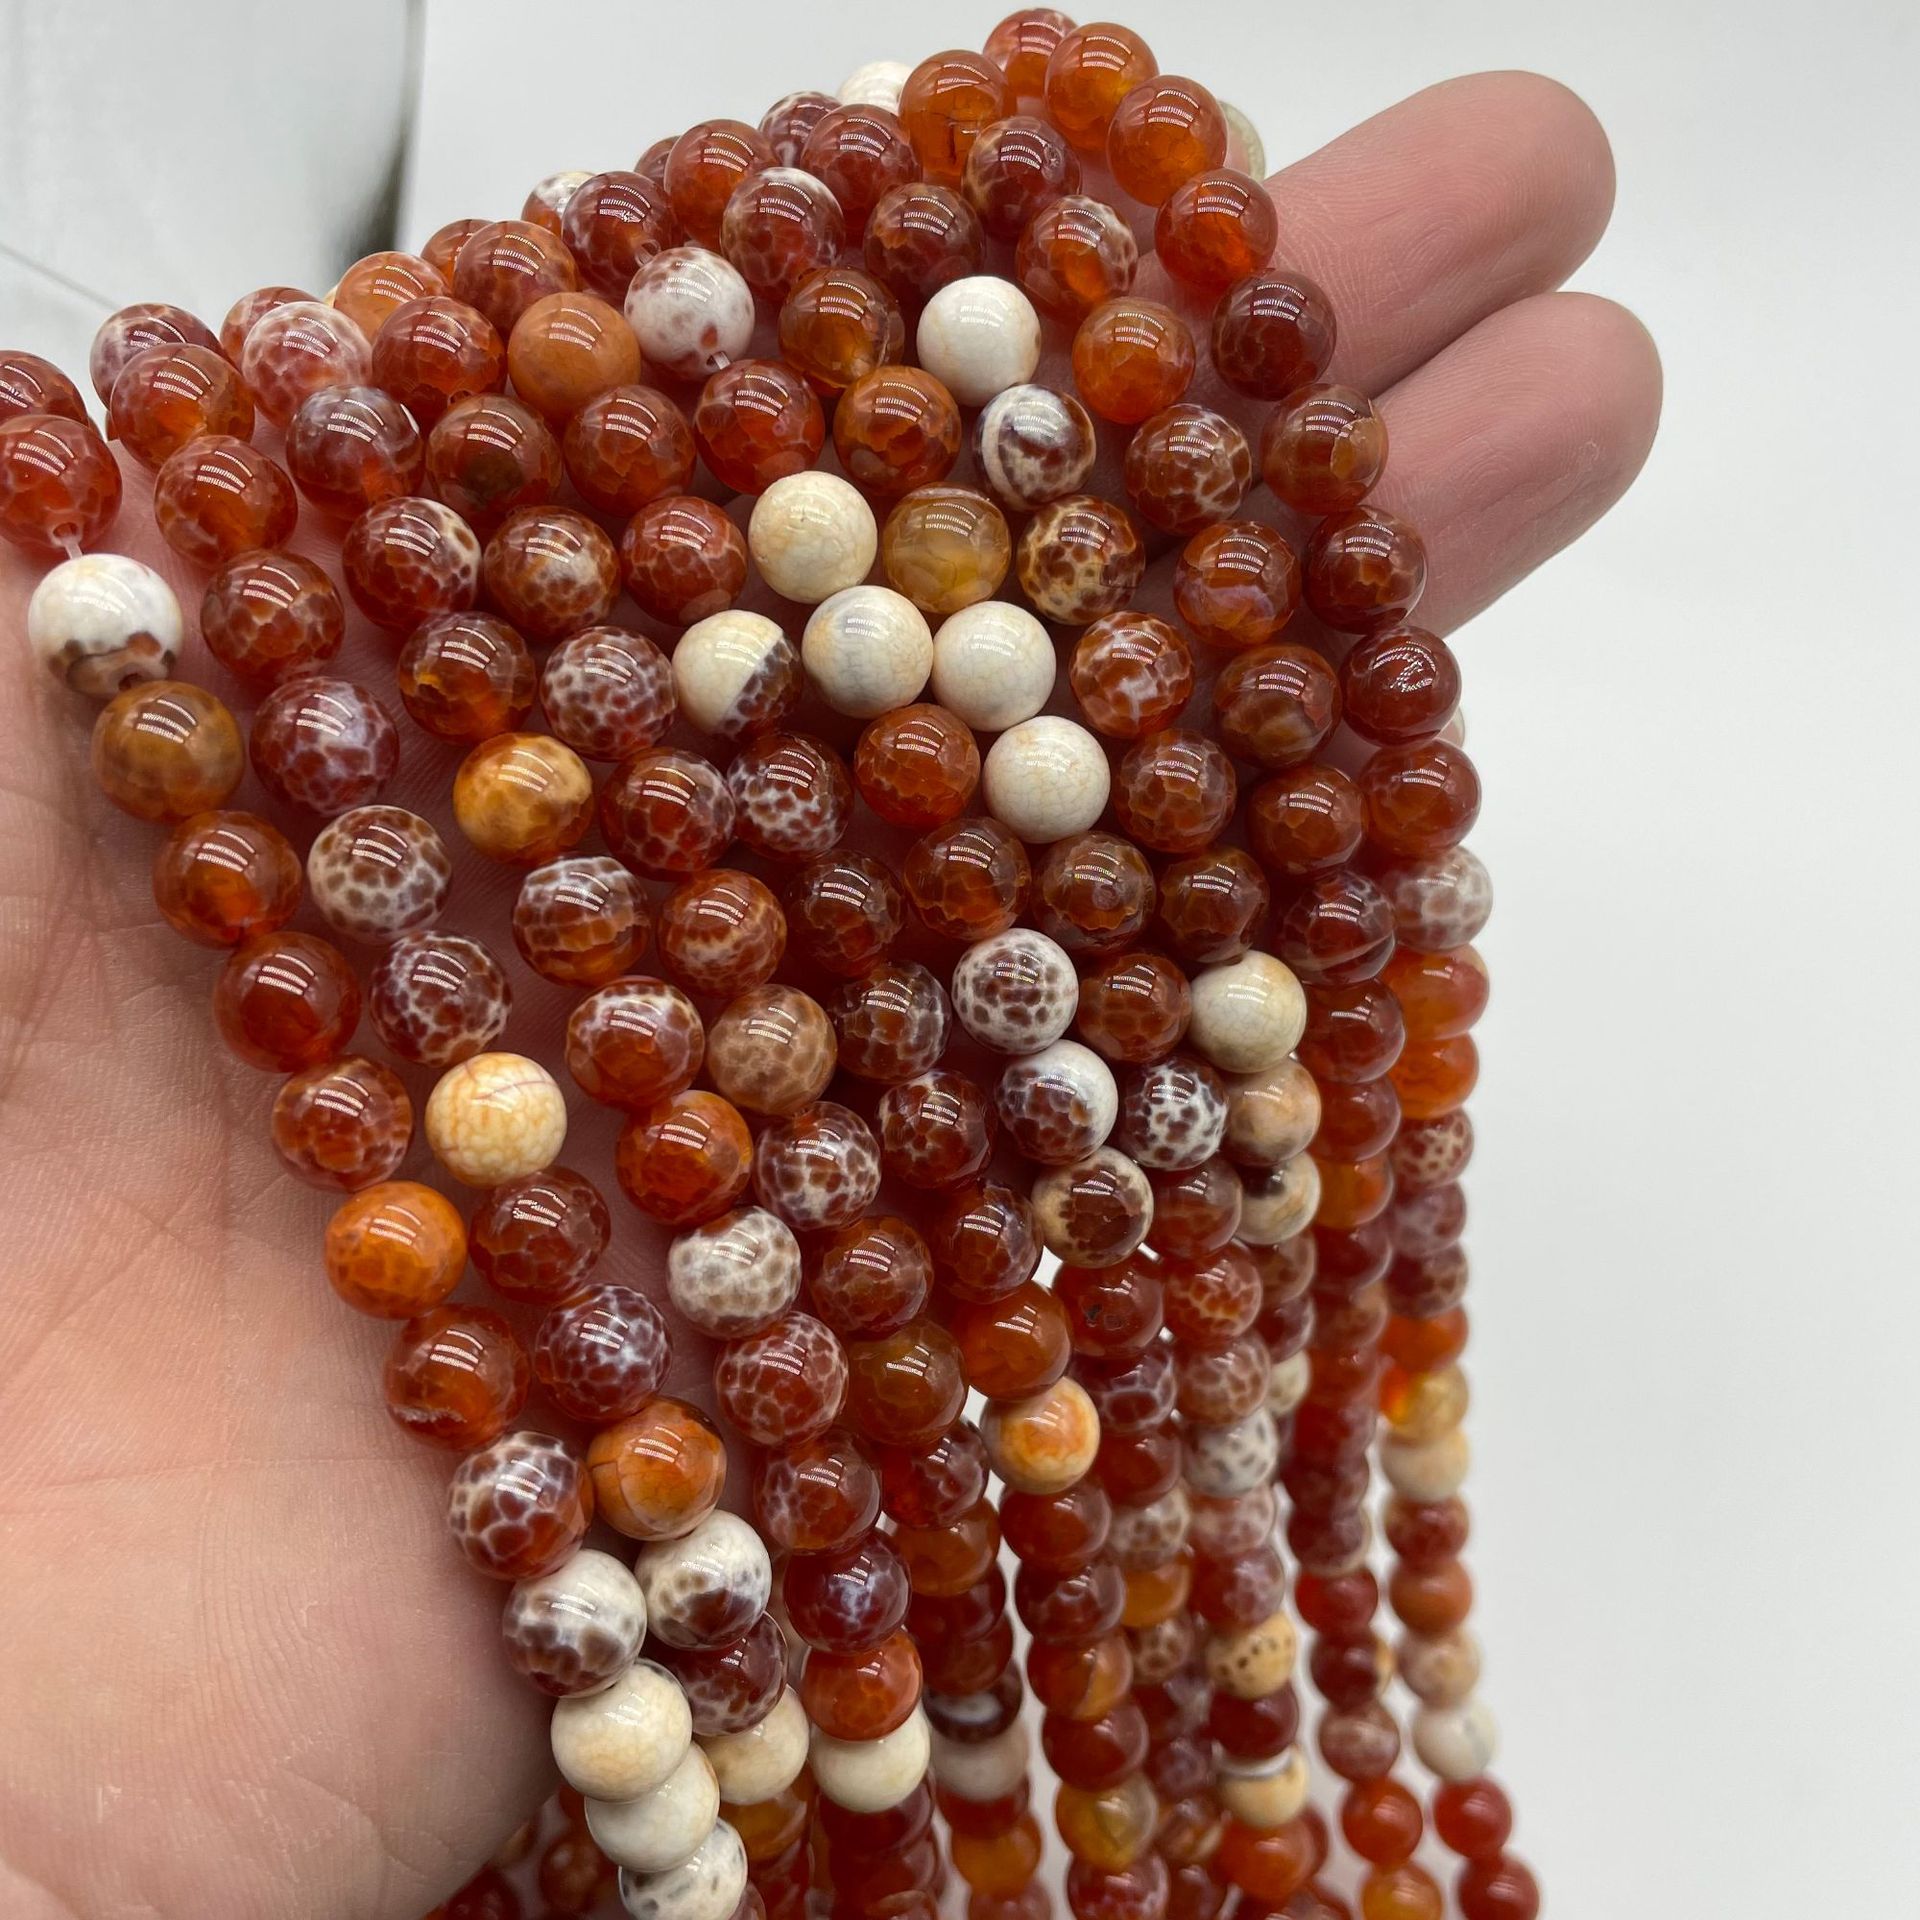 1:Red fire agate